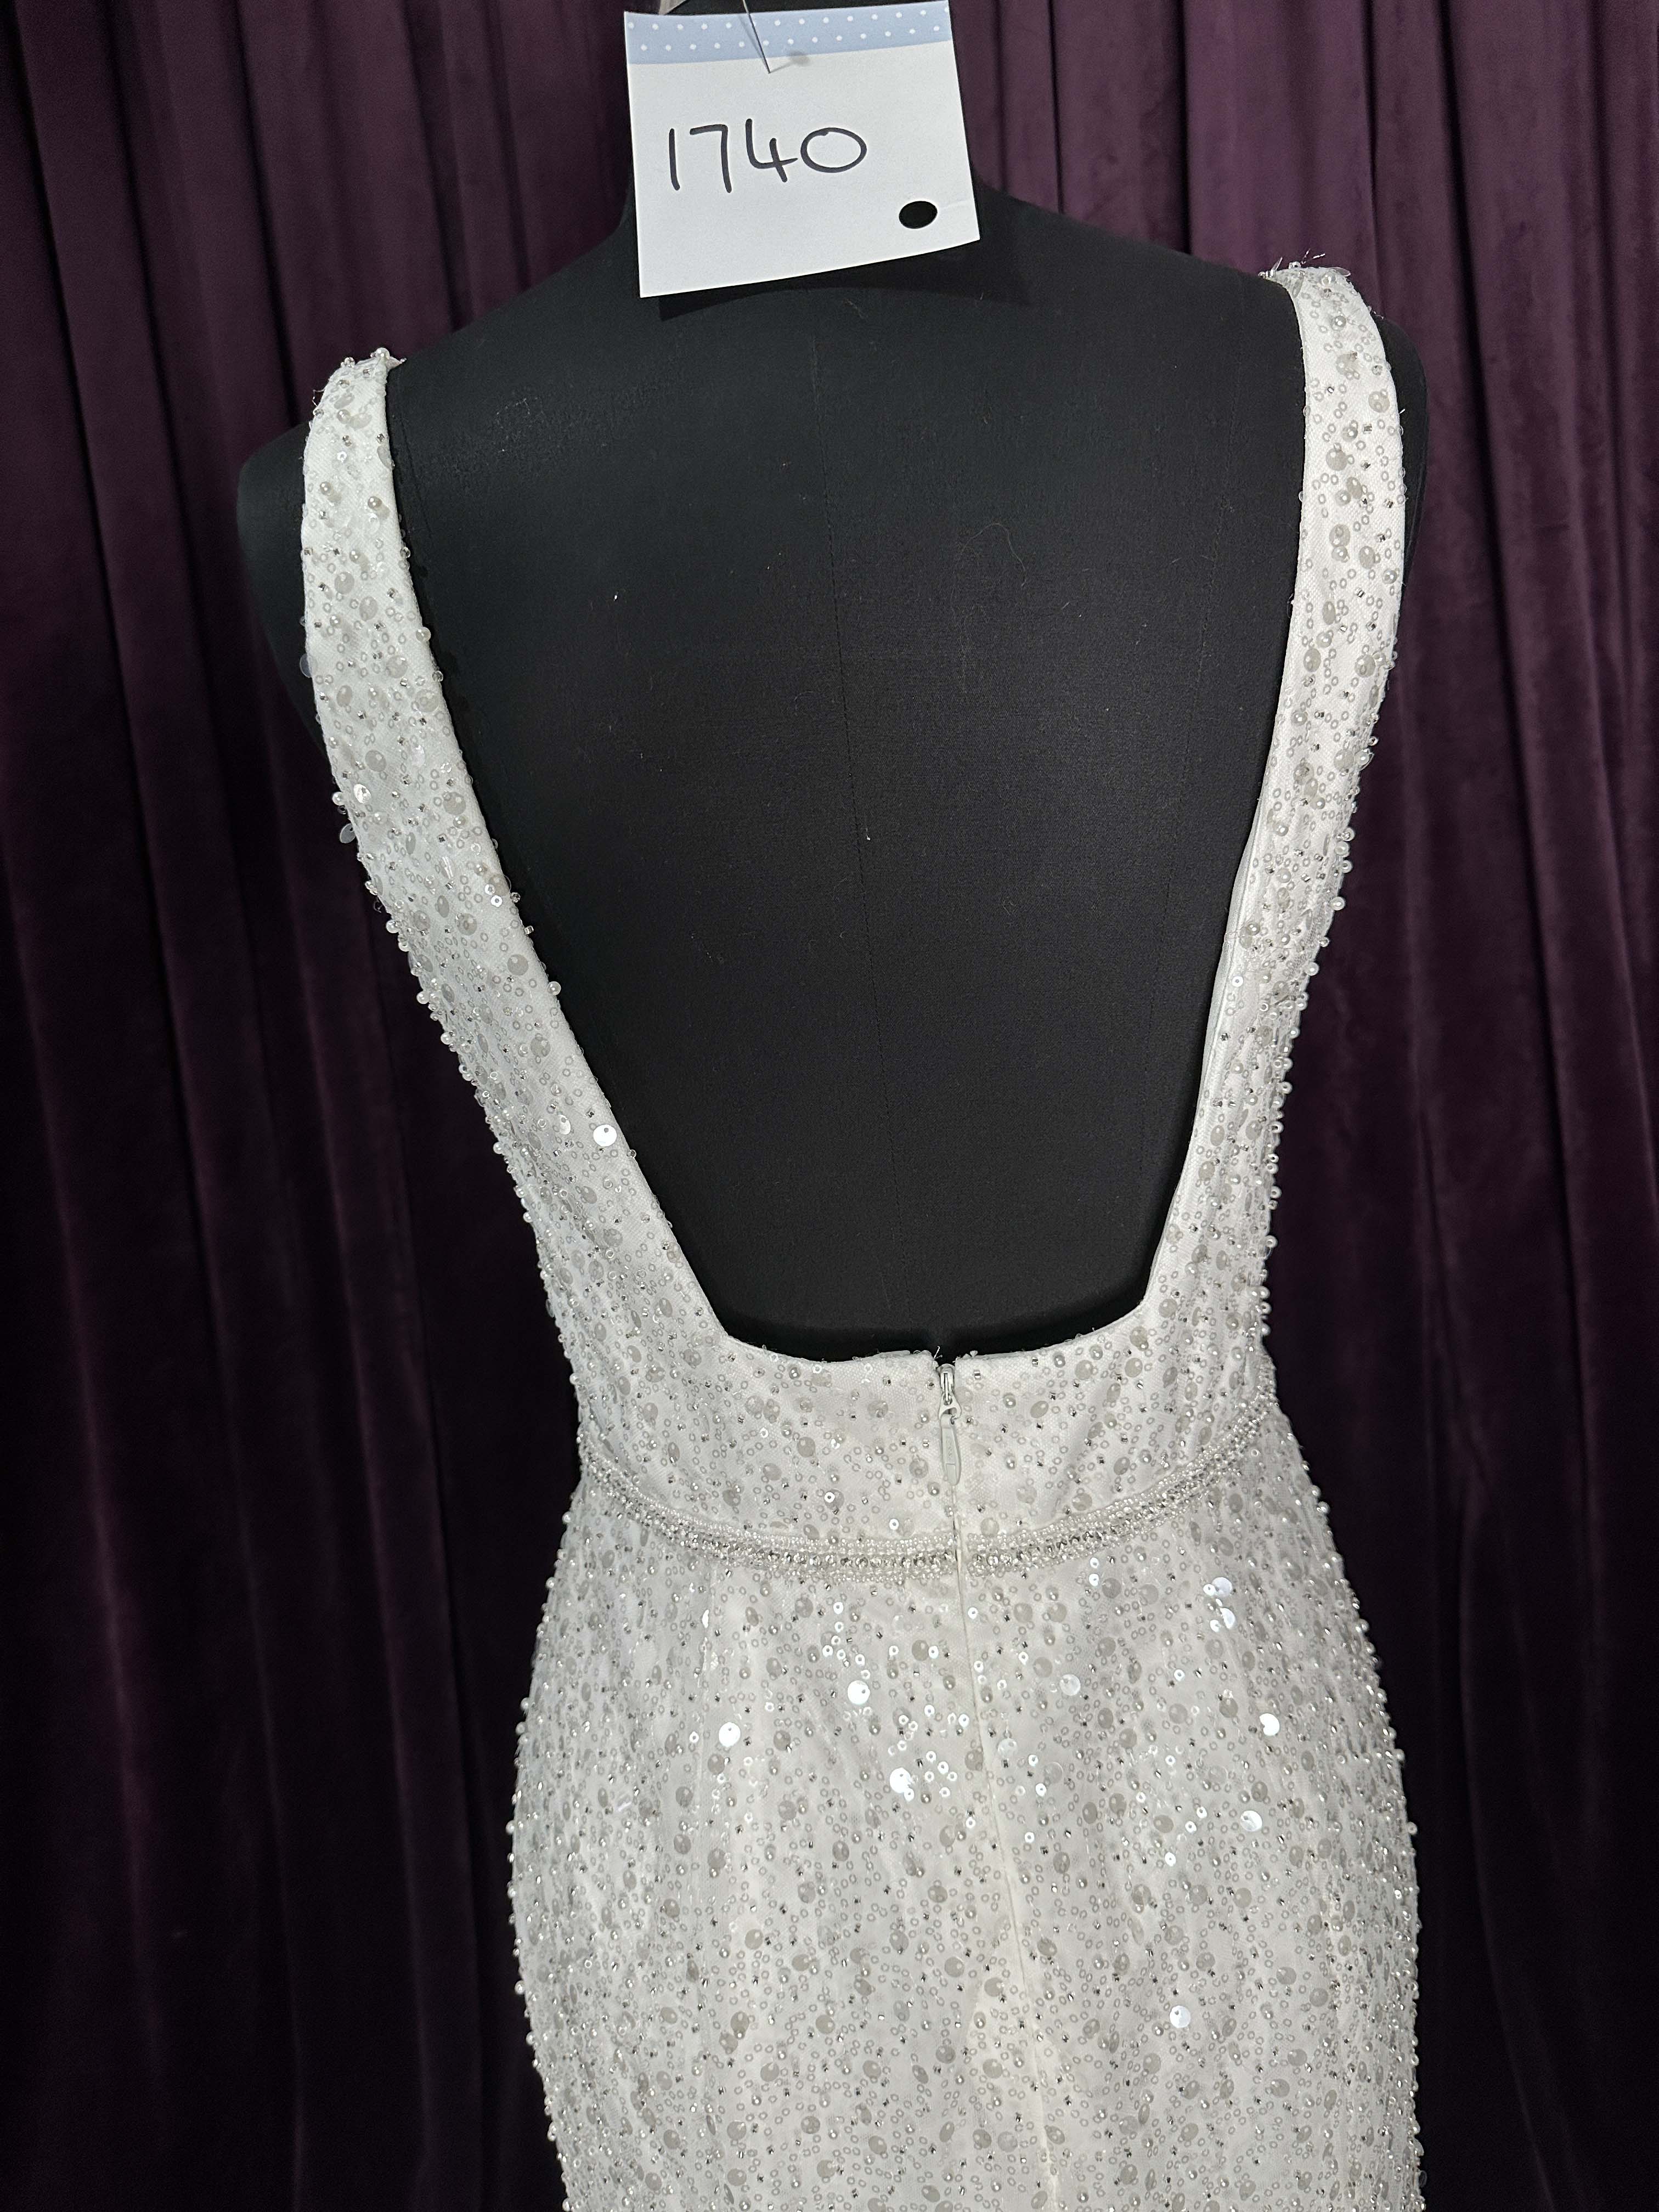 Scoop Neckline with Low Back Made in Bling Fabric Wedding Dresses Online -  #1740